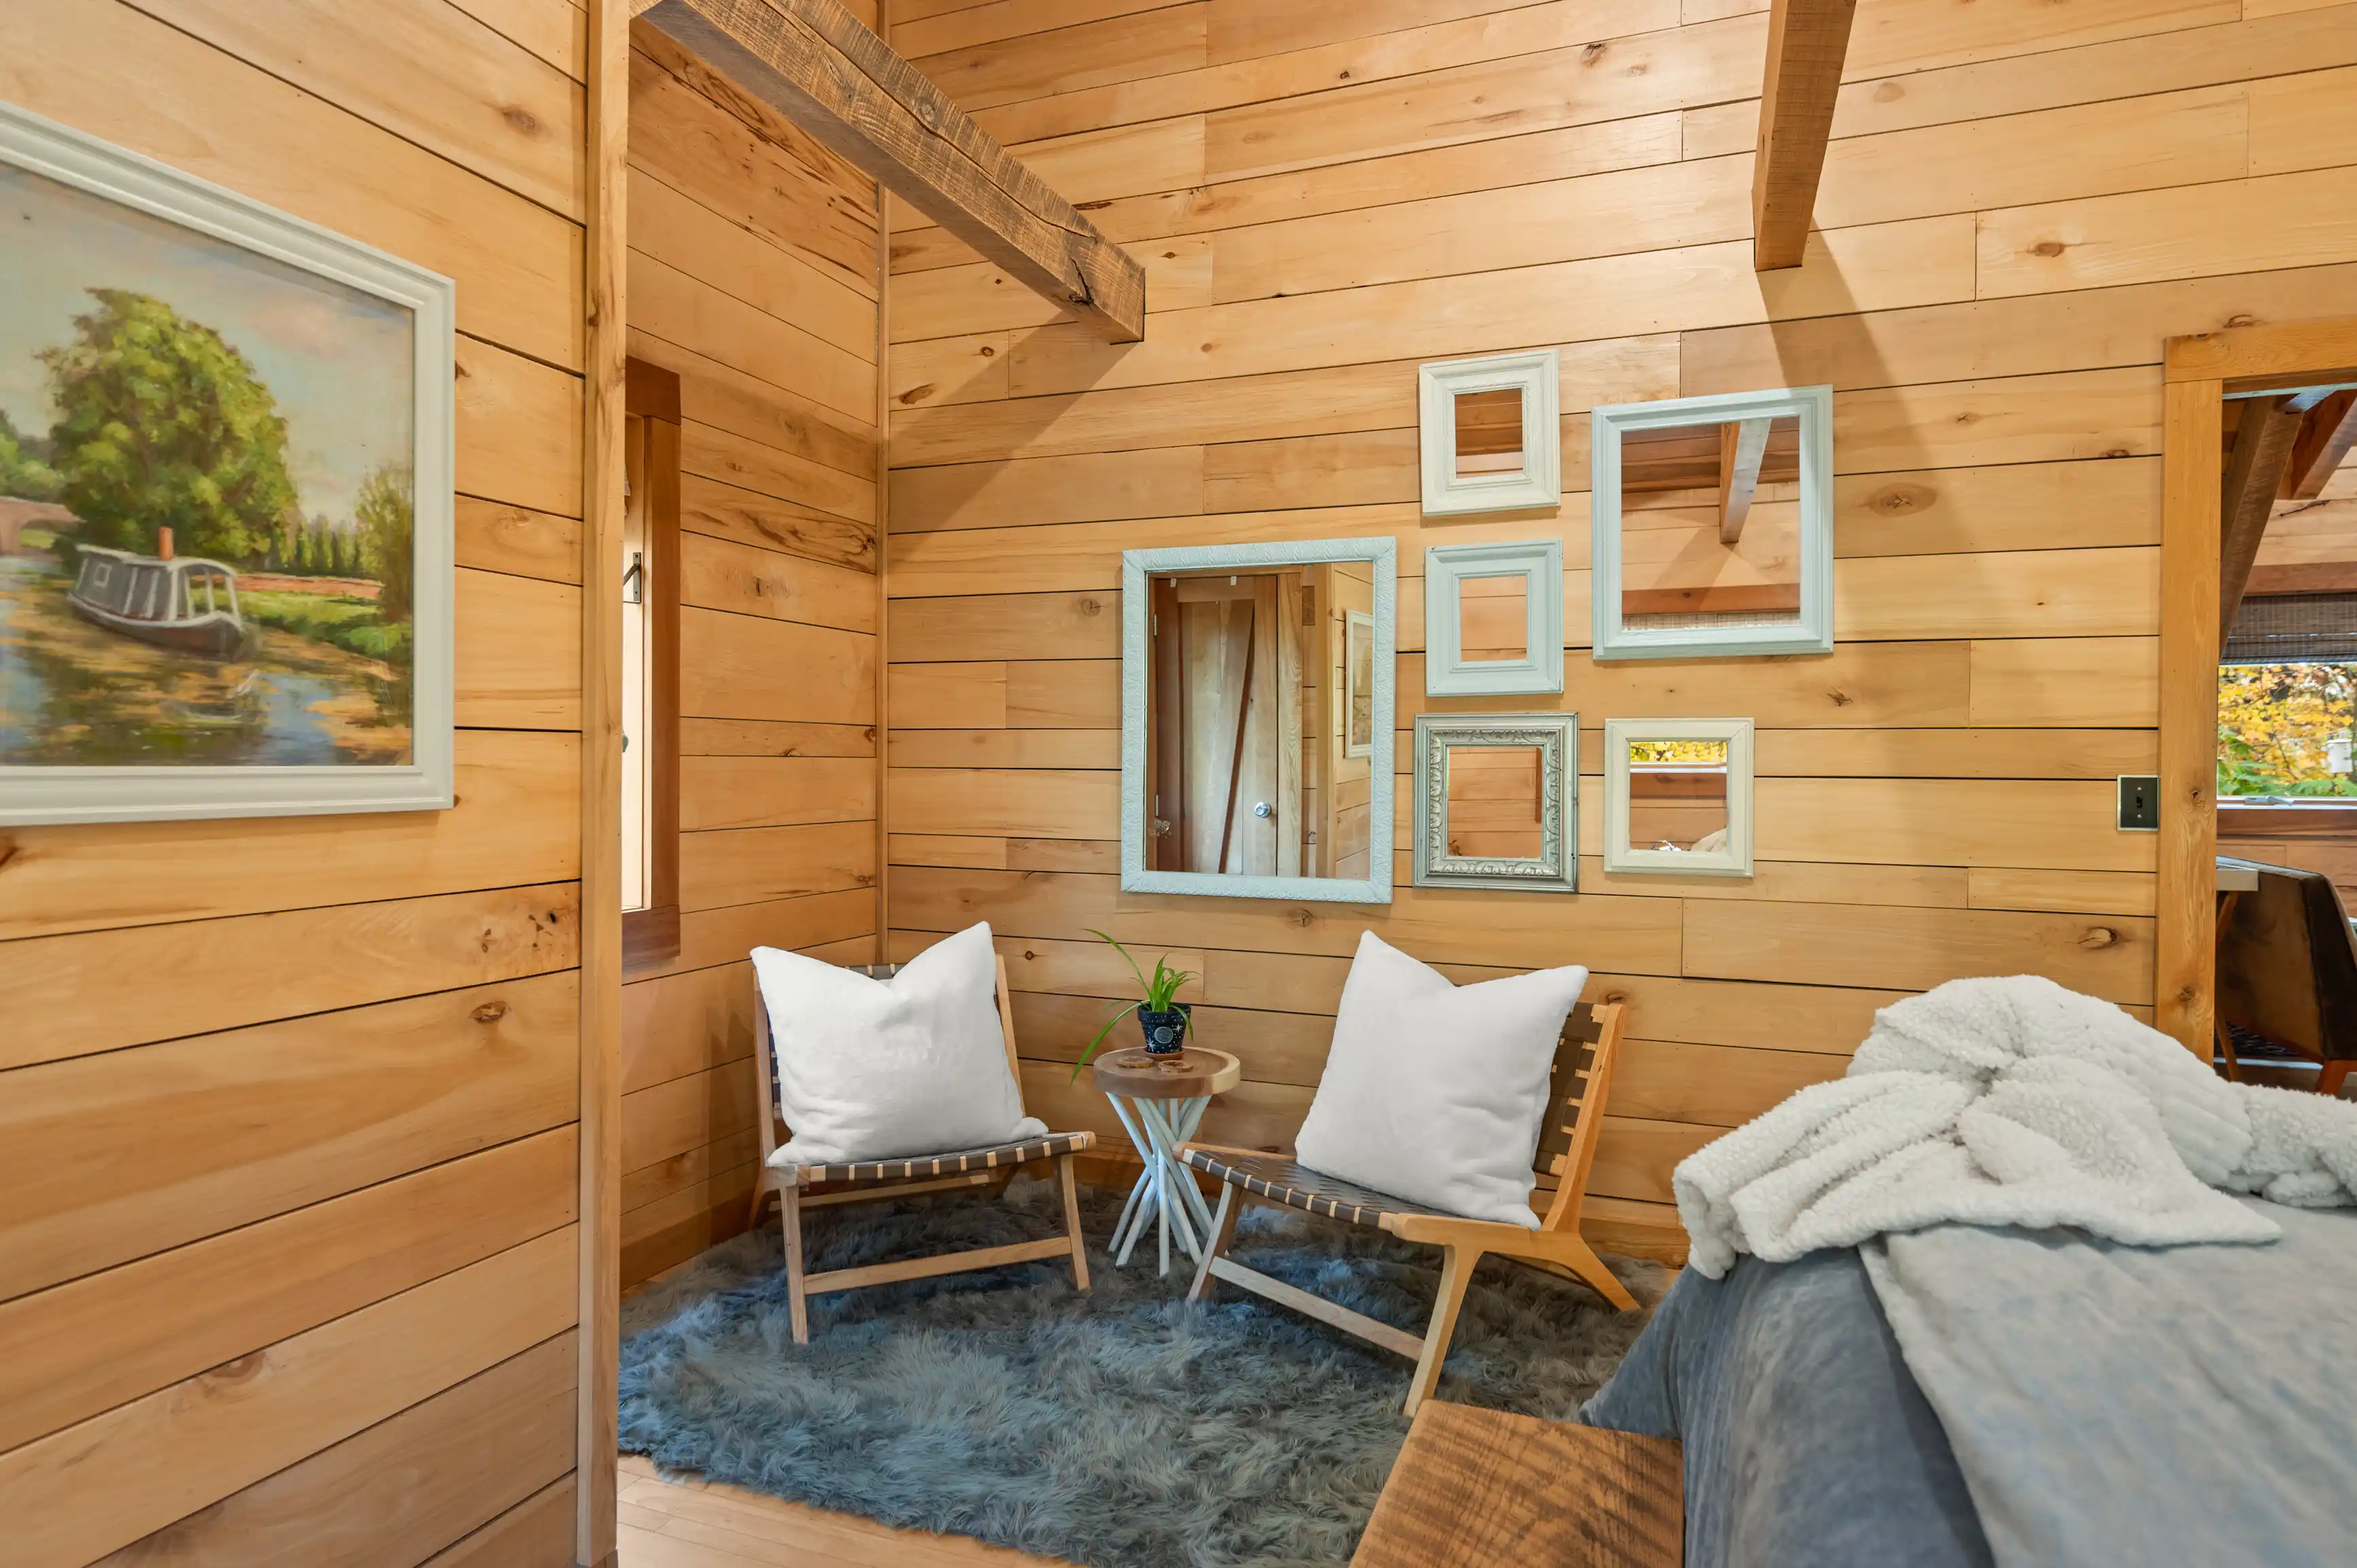 Cozy wooden cabin interior with two chairs, a plush rug, a rustic bed, and decorative mirrors on the wall.